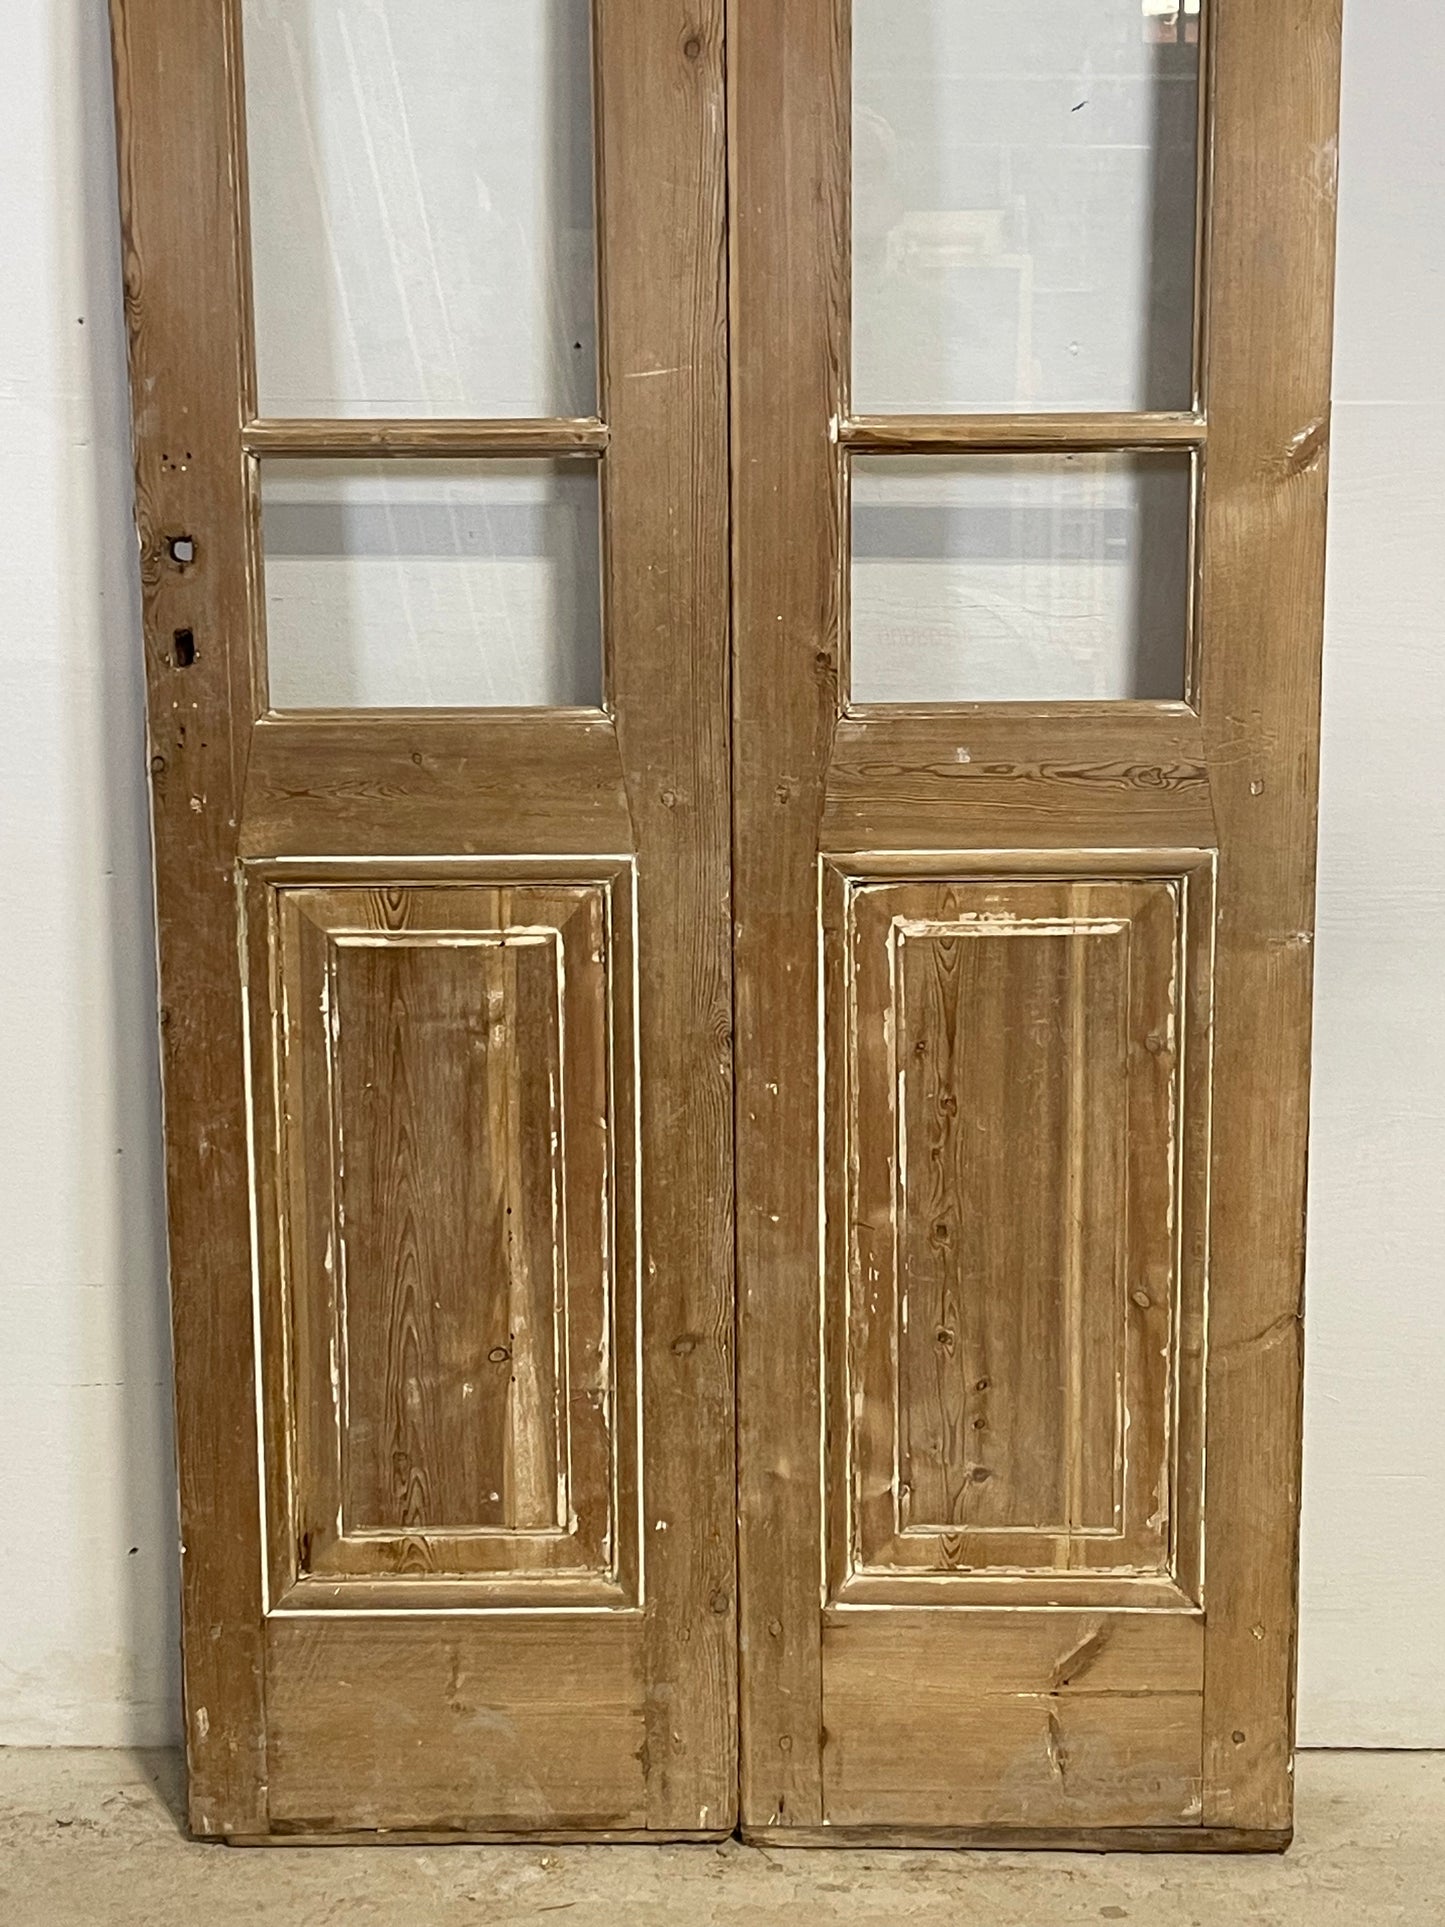 Antique French panel doors with glass (99x37.5) k315